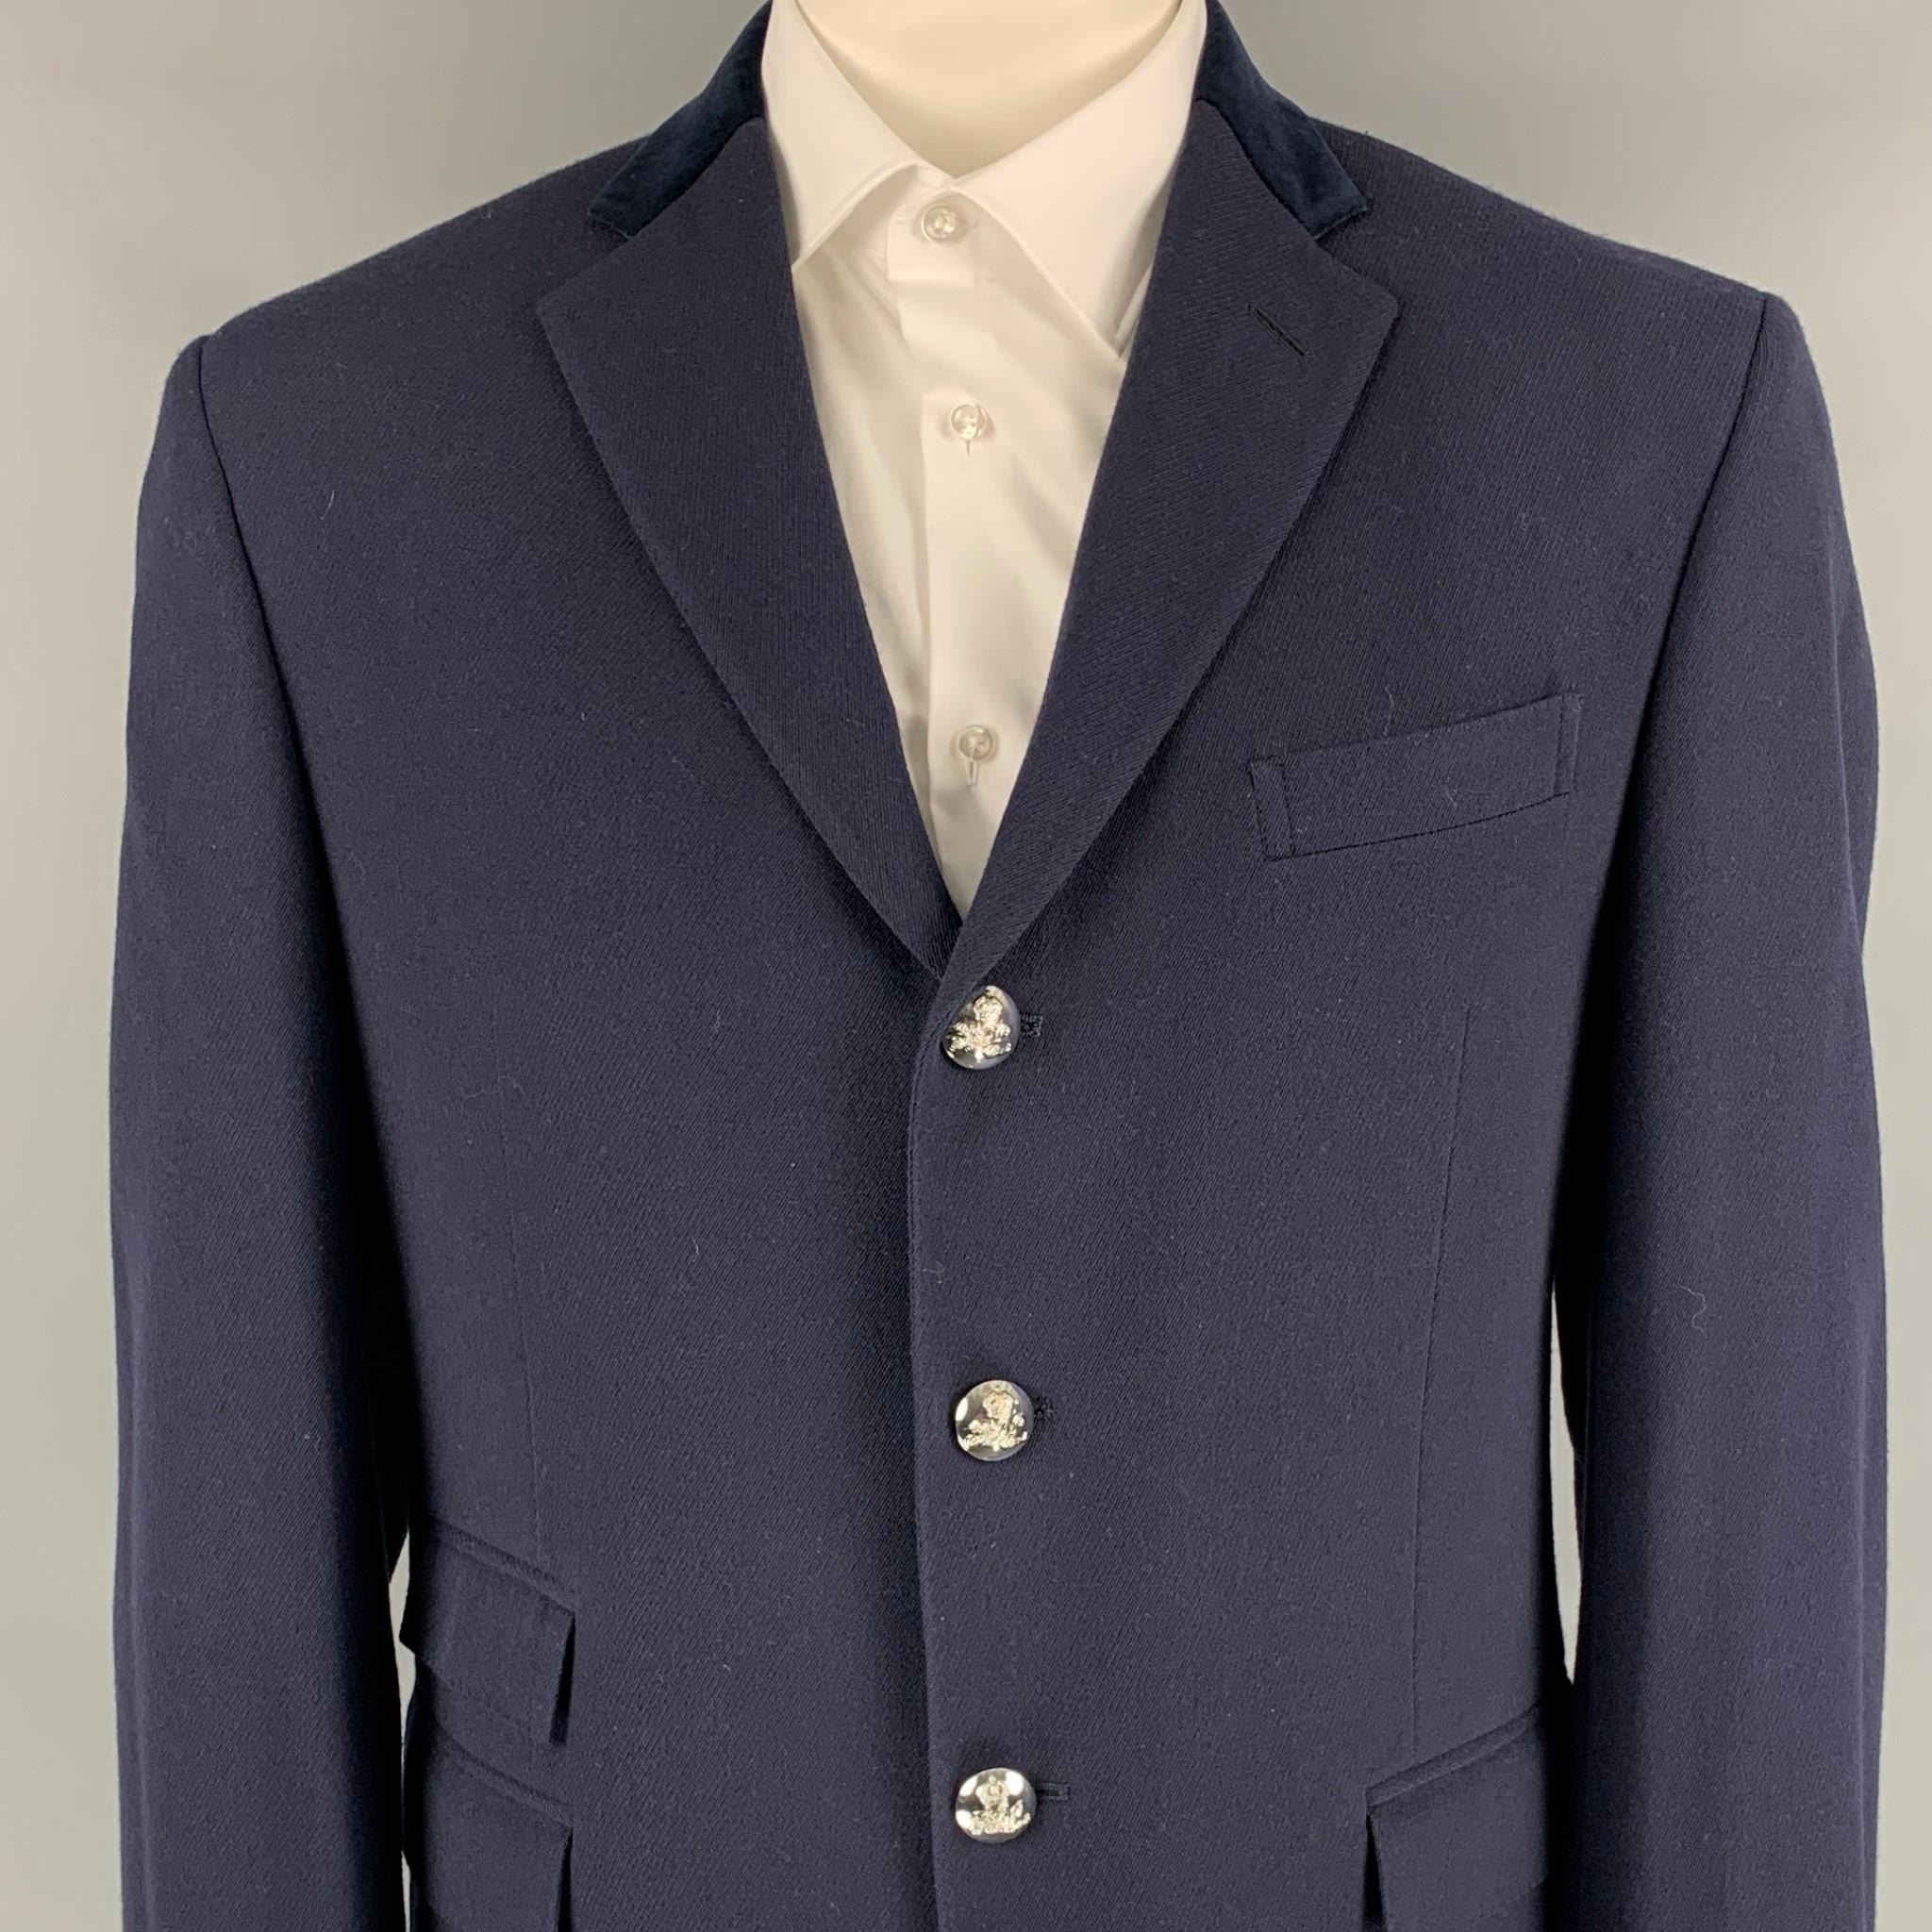 POLO by RALPH LAUREN sport coat comes in a navy virgin wool with a full liner featuring a velvet notch lapel, flap pockets, double back vent, and a silver tone buttoned closure. 

Very Good Pre-Owned Condition.
Marked: 44 R

Measurements:

Shoulder: